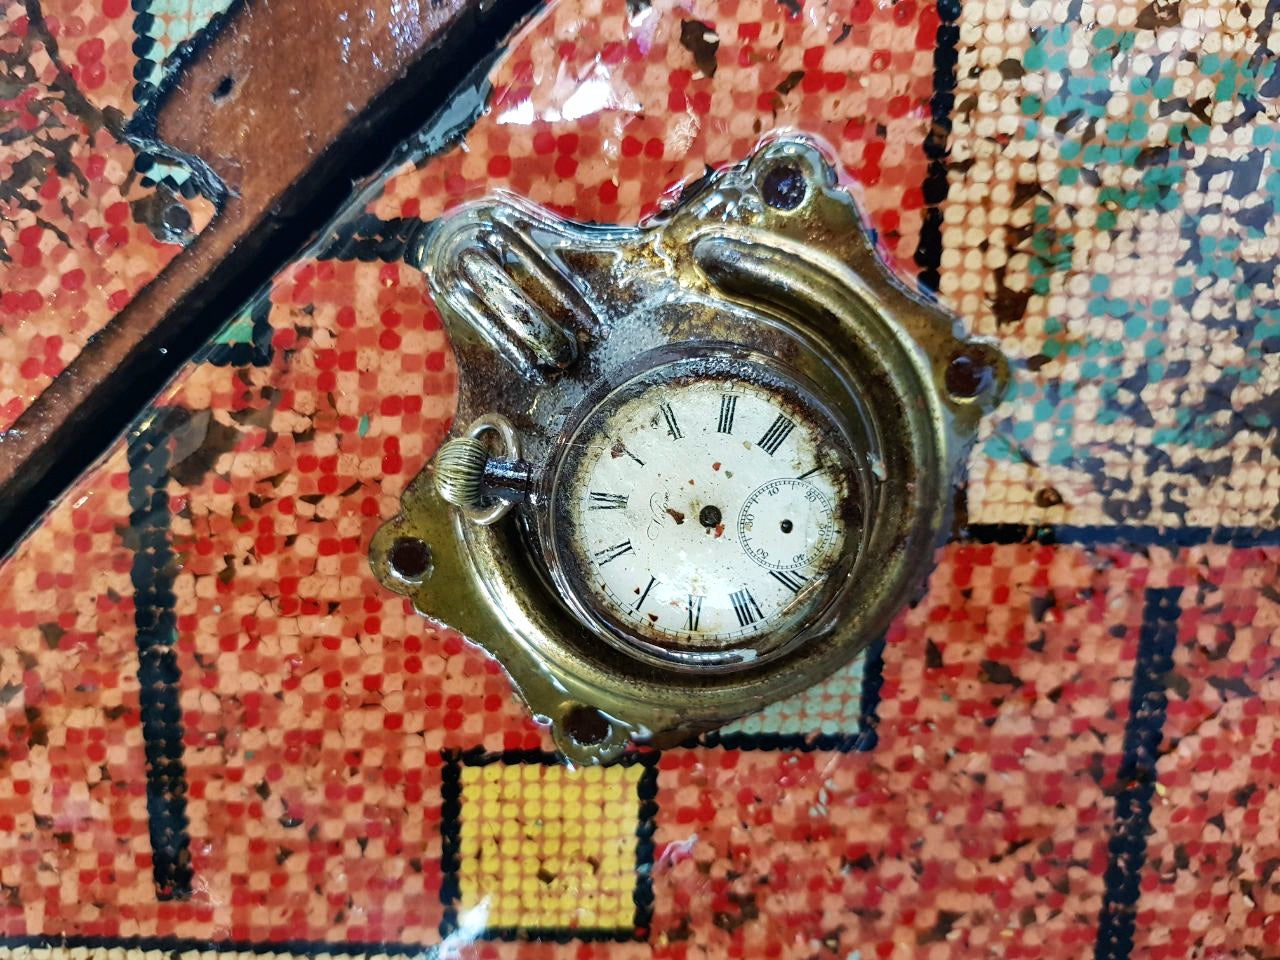 Vintage steampunk red travel box close up view of pocket watch detail